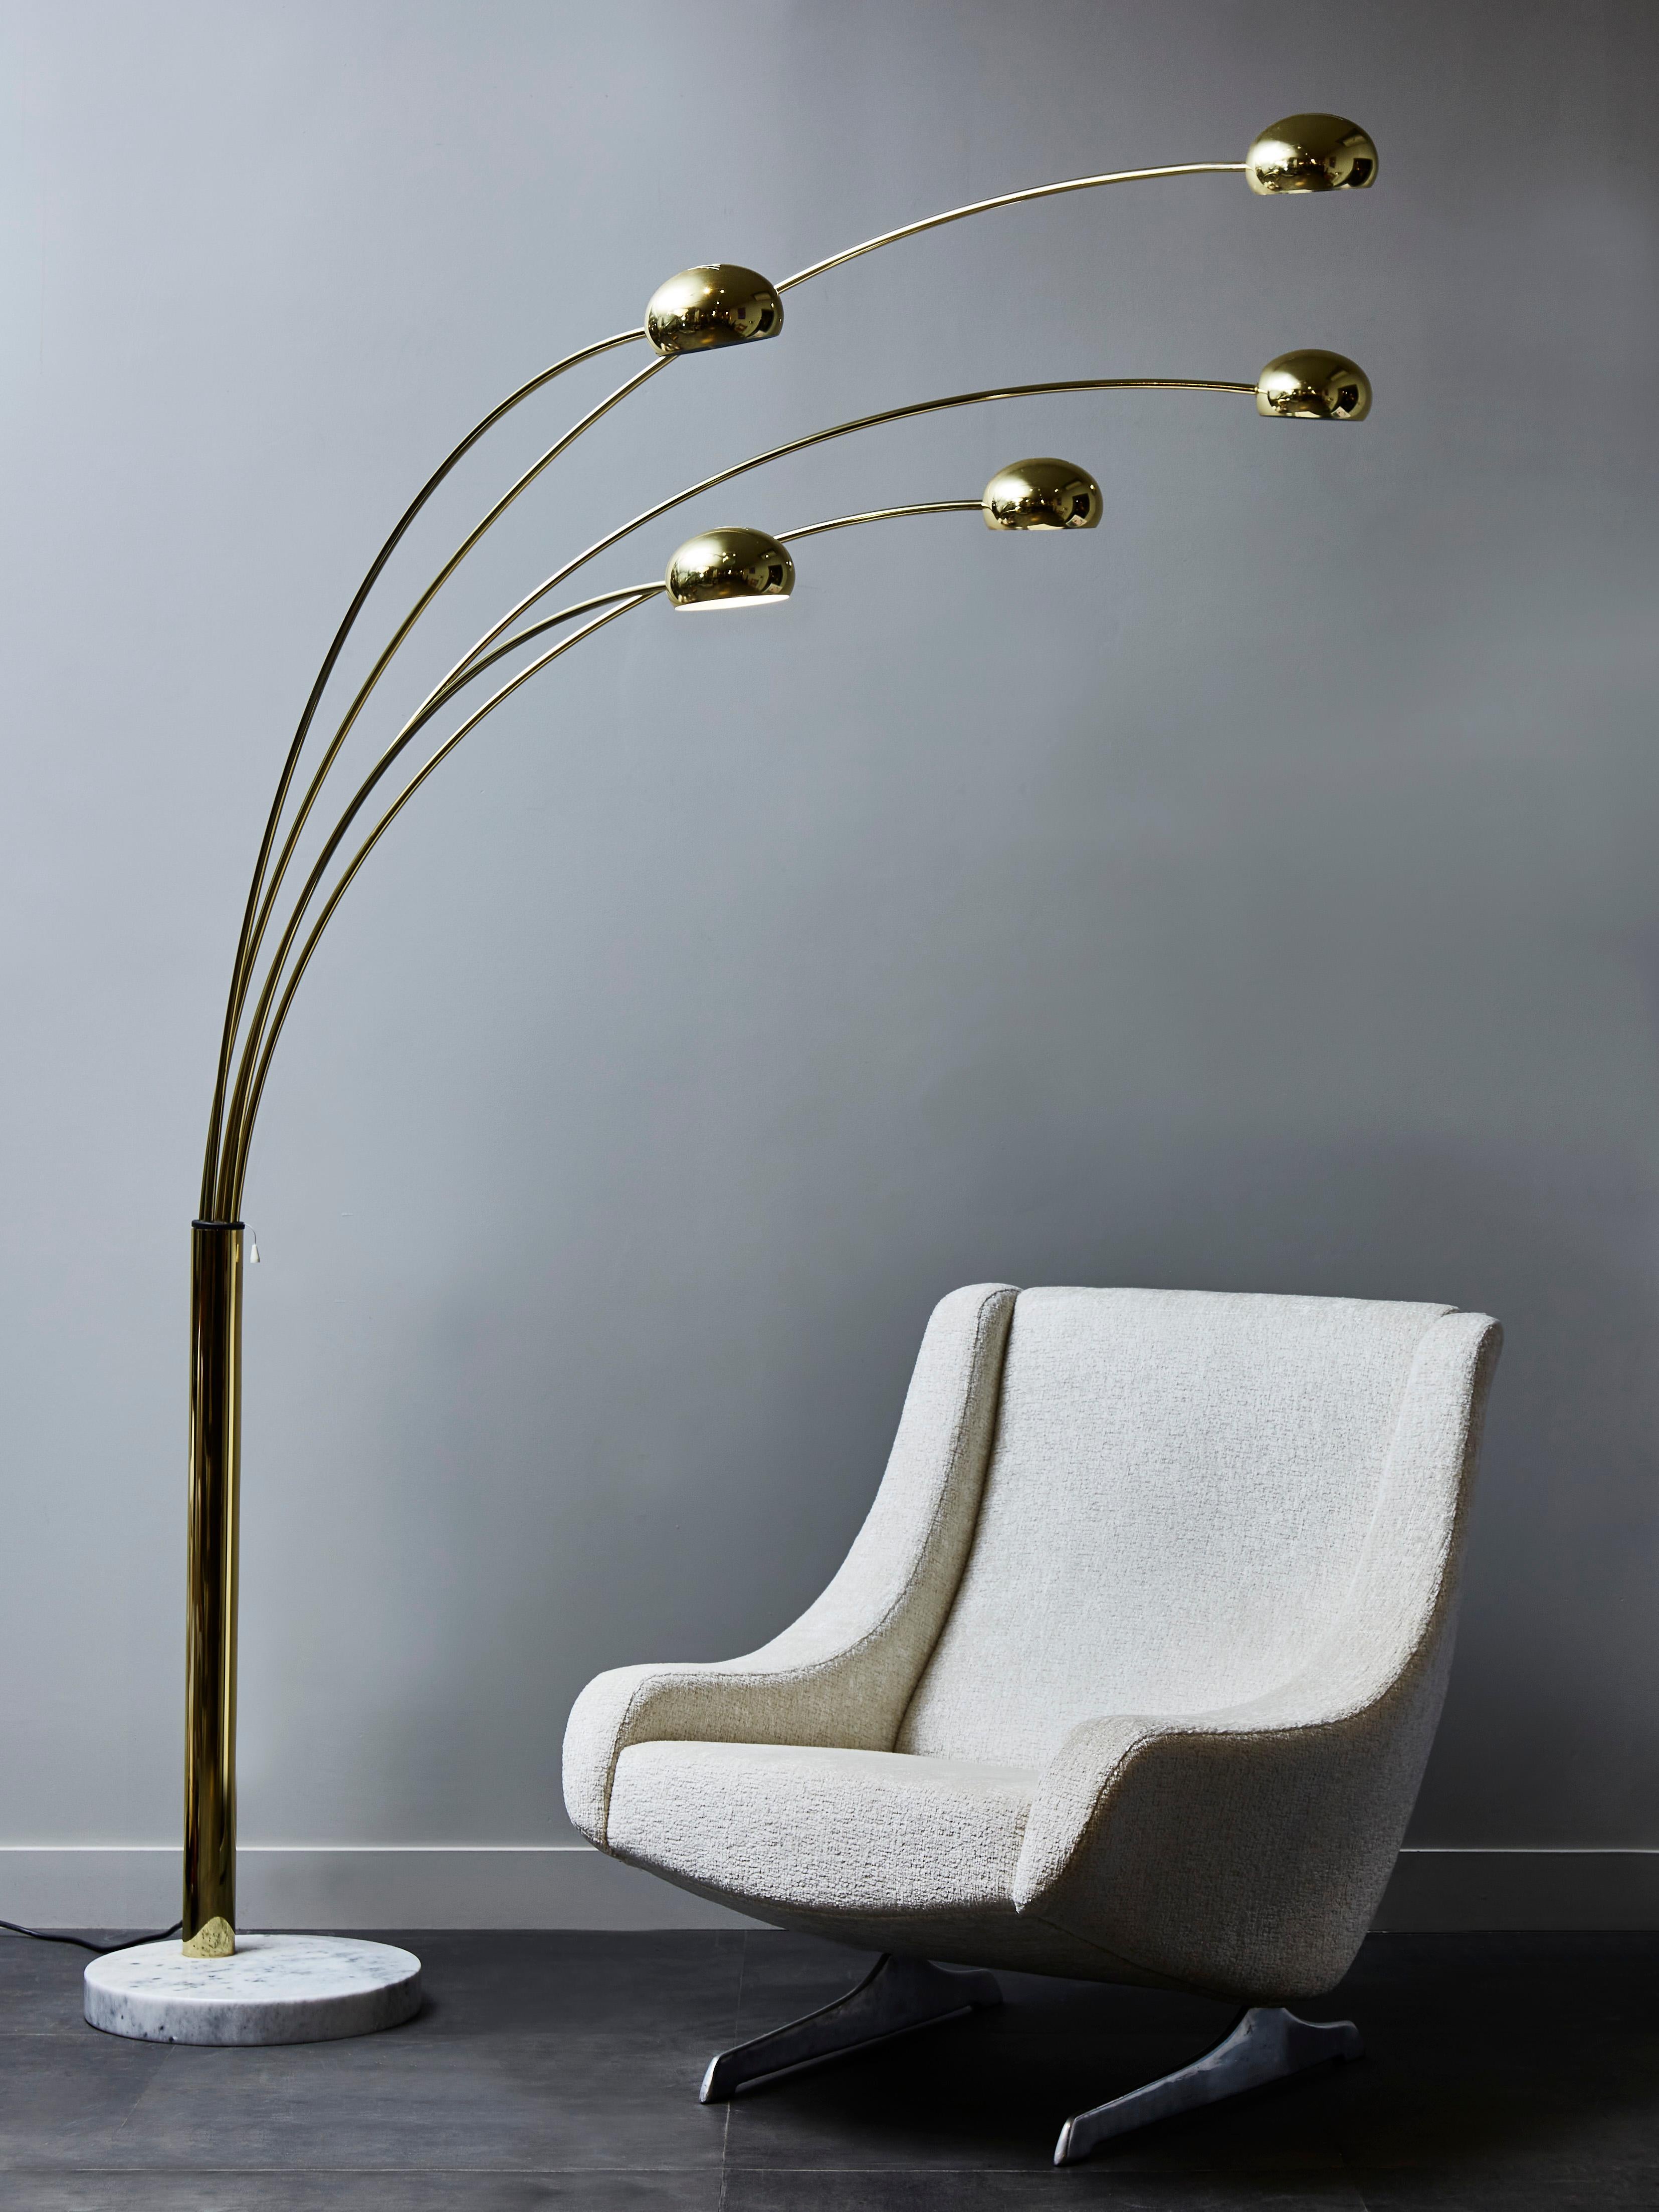 Swedish Arc floor lamp made of a white marble foot, brass body and arms. Each of the five arm is adjustable as well as the sconces holding the light bulbs.

Clever switch mechanism, allowing you to turn on either two, three or all